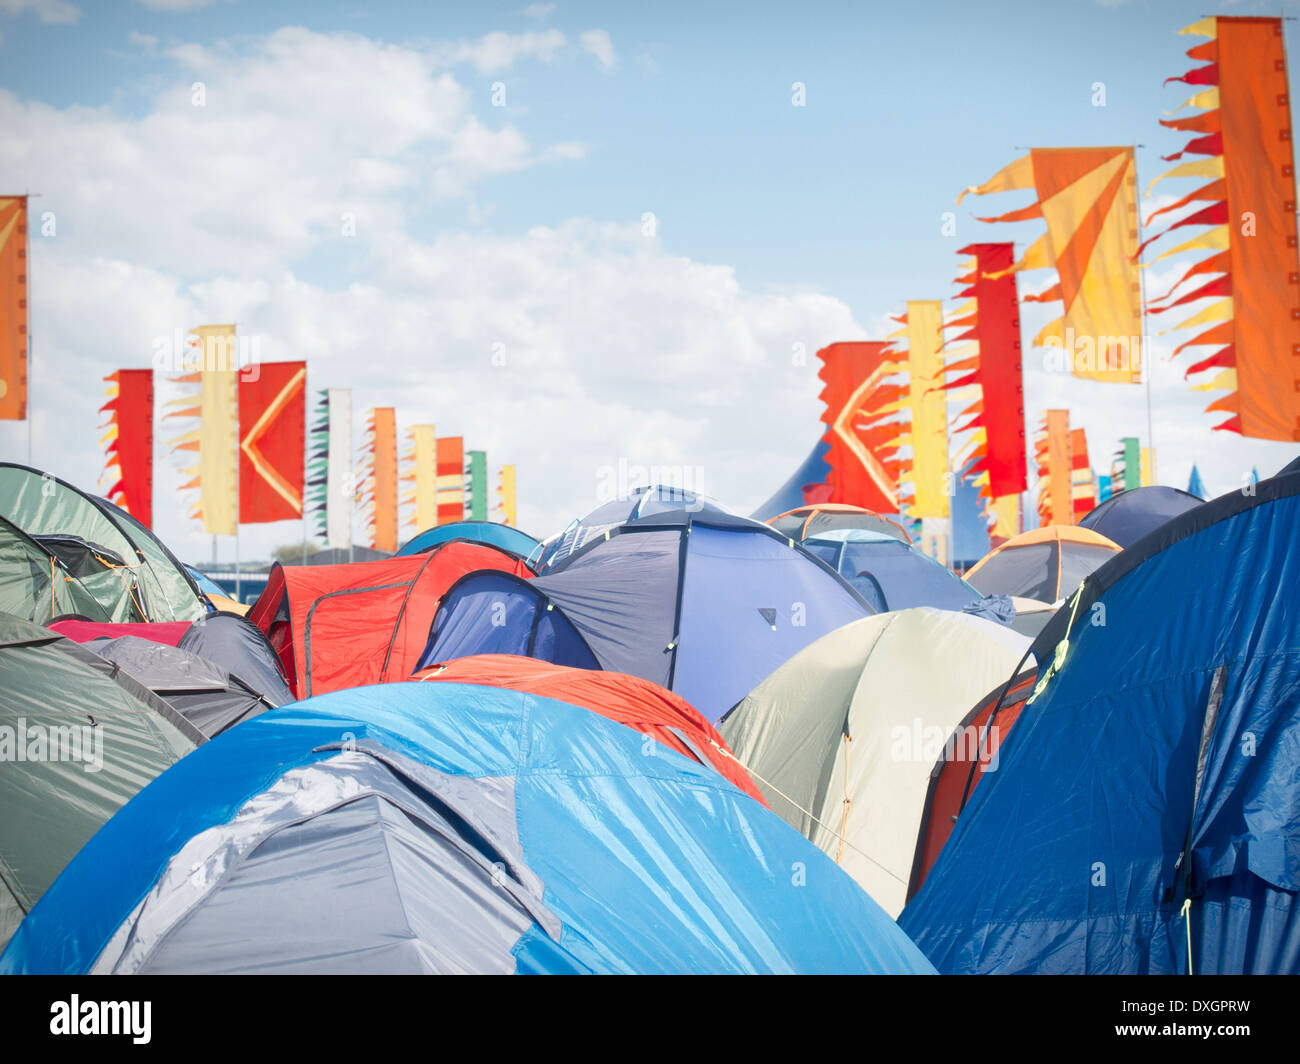 Tents crowded at music festival Stock Photo